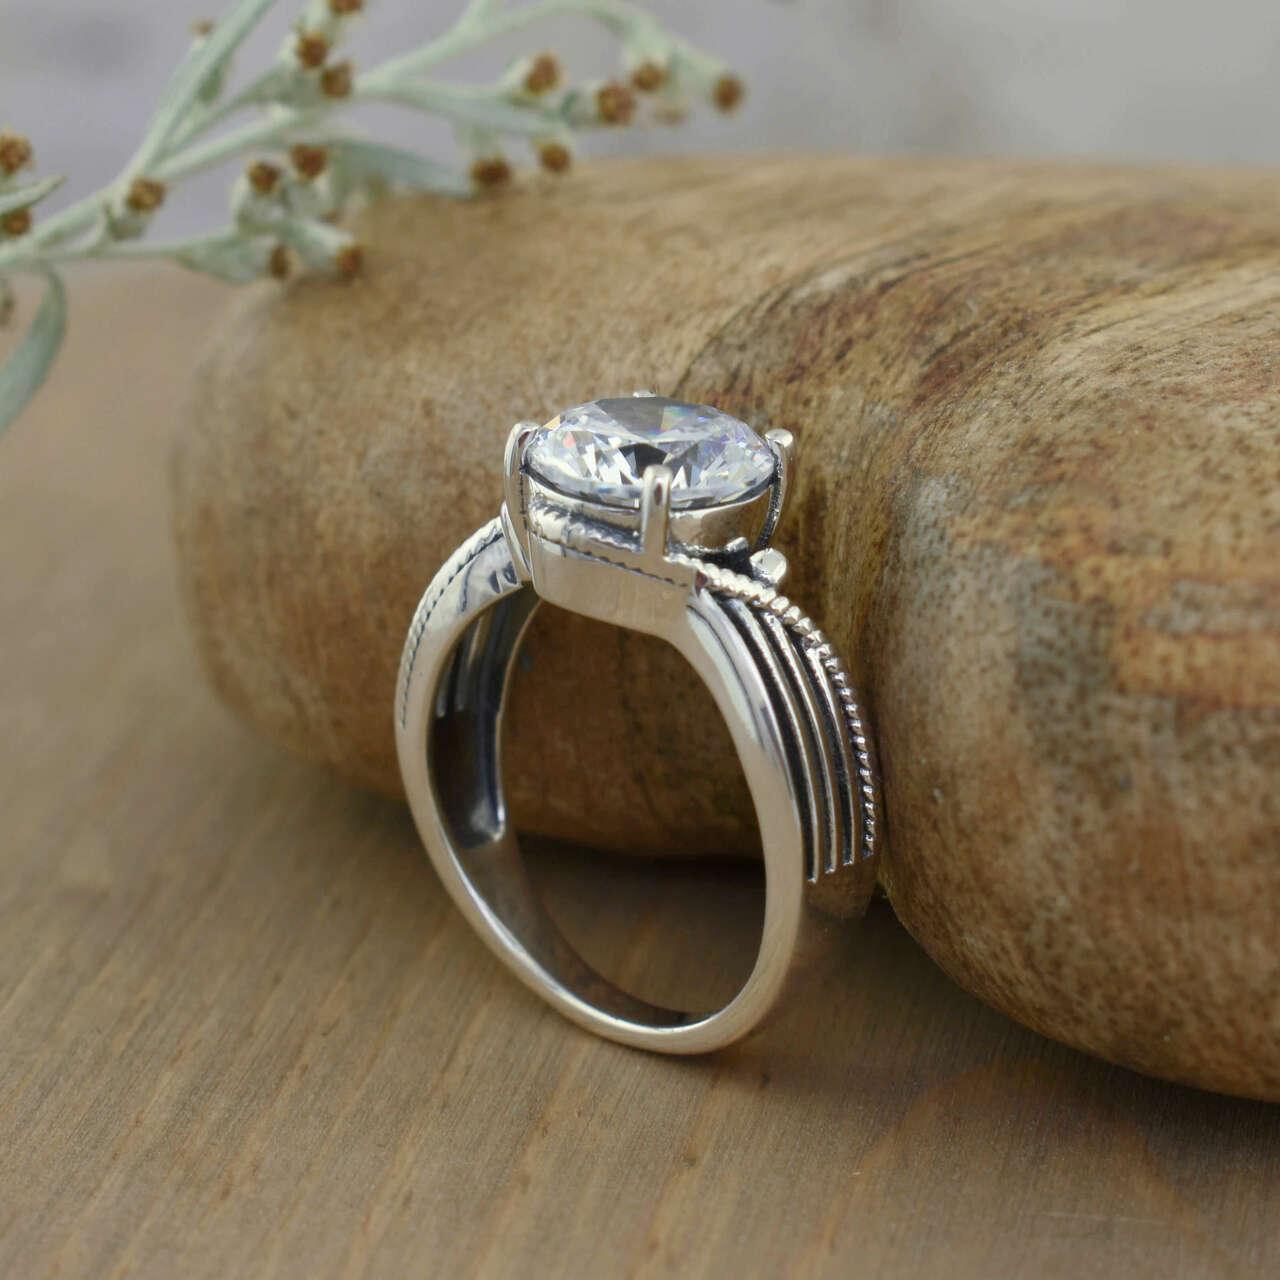 Designer ring in sterling silver and center prong set round faceted CZ